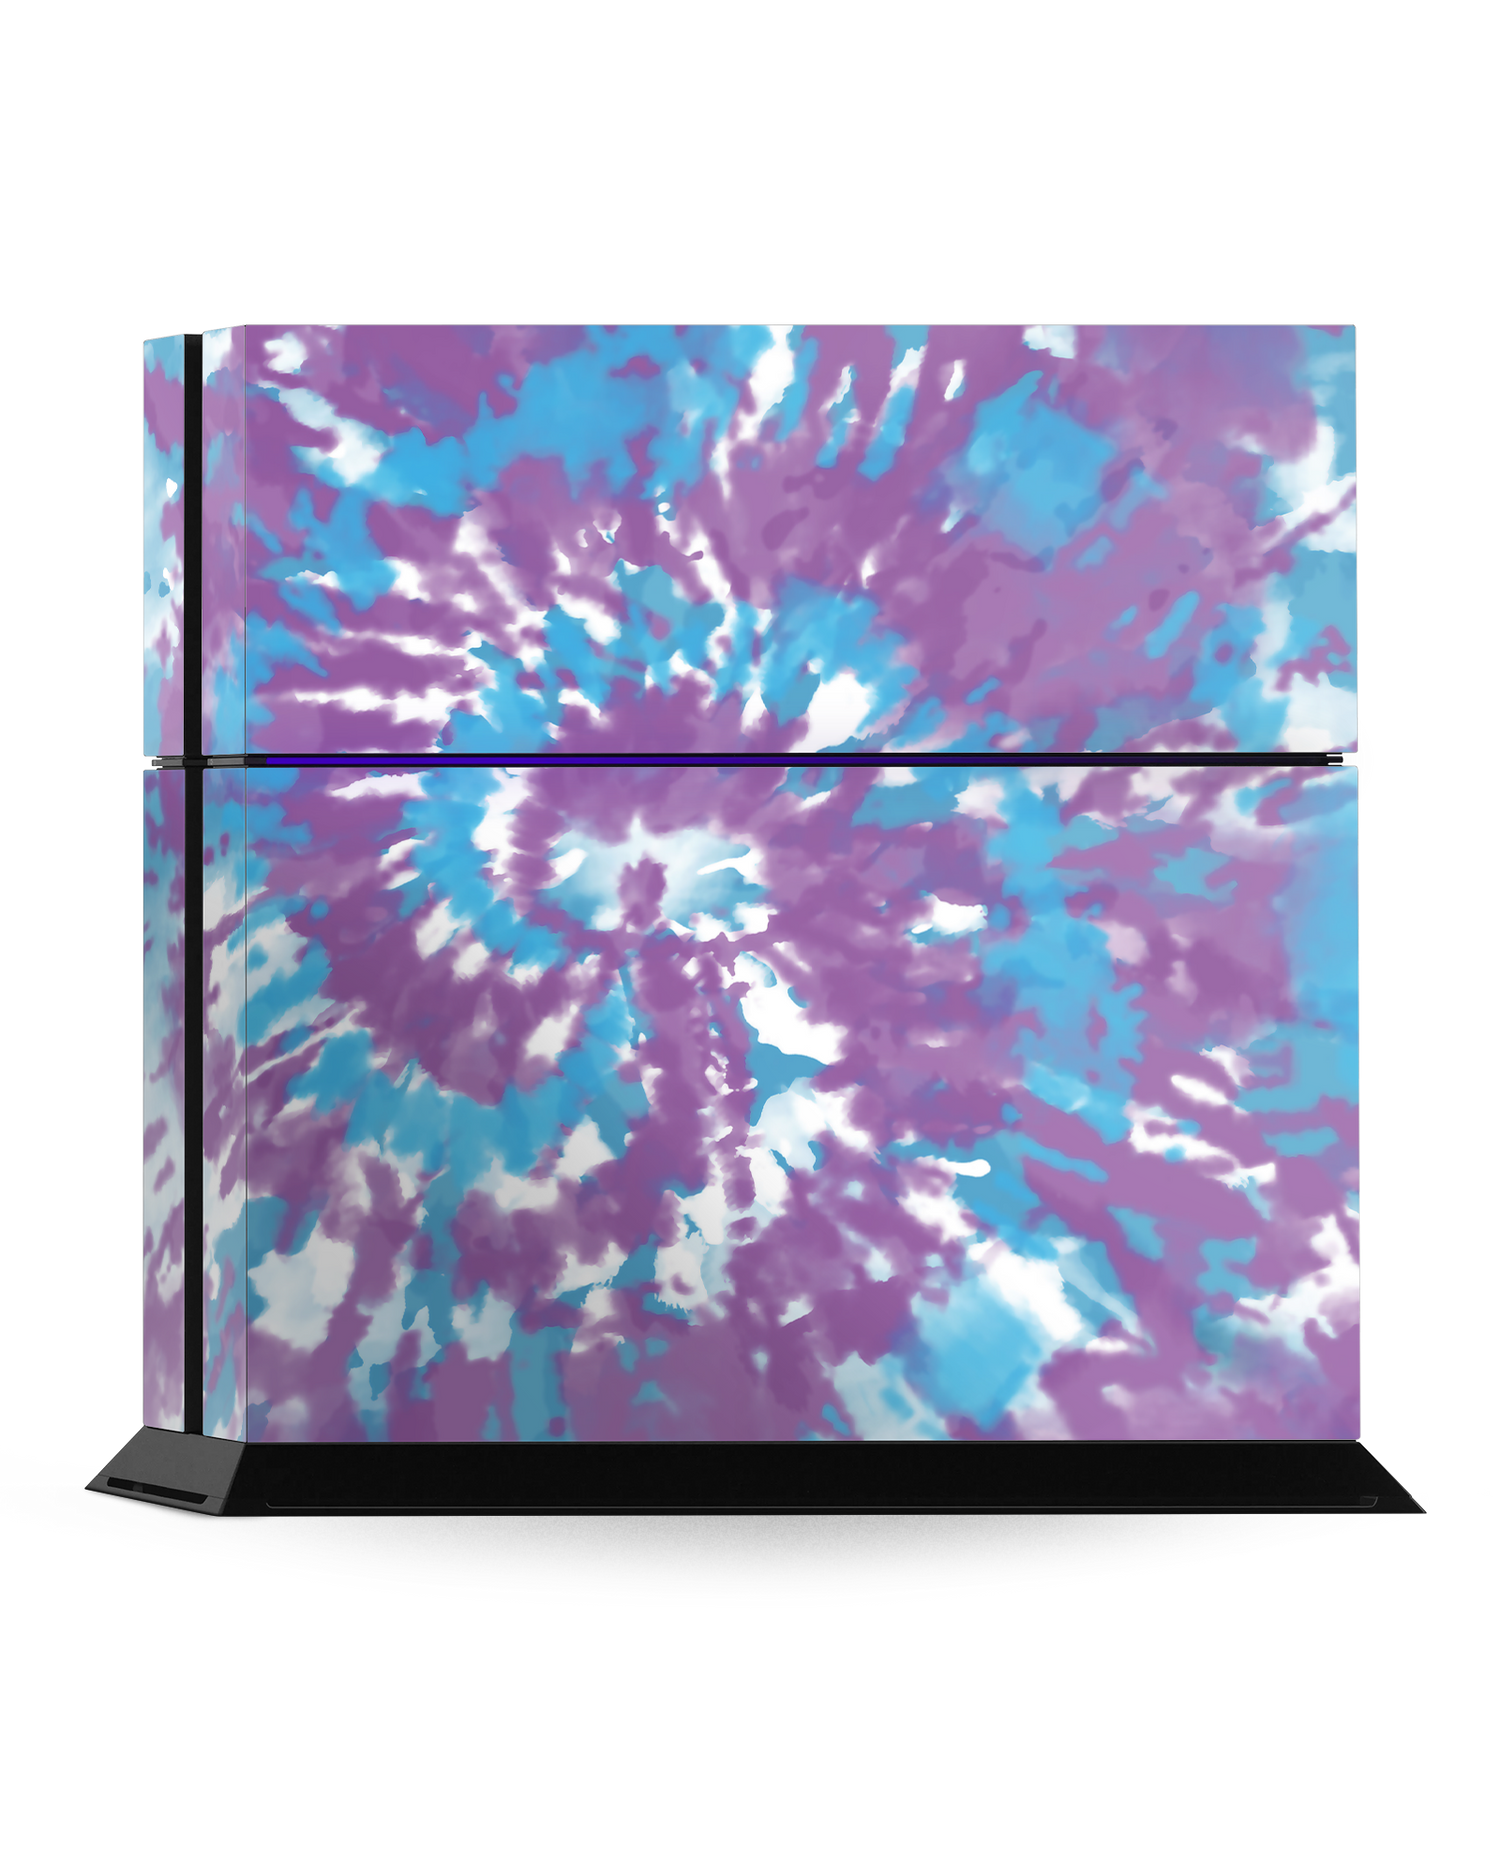 Classic Tie Dye Console Skin for Sony PlayStation 4: Standing